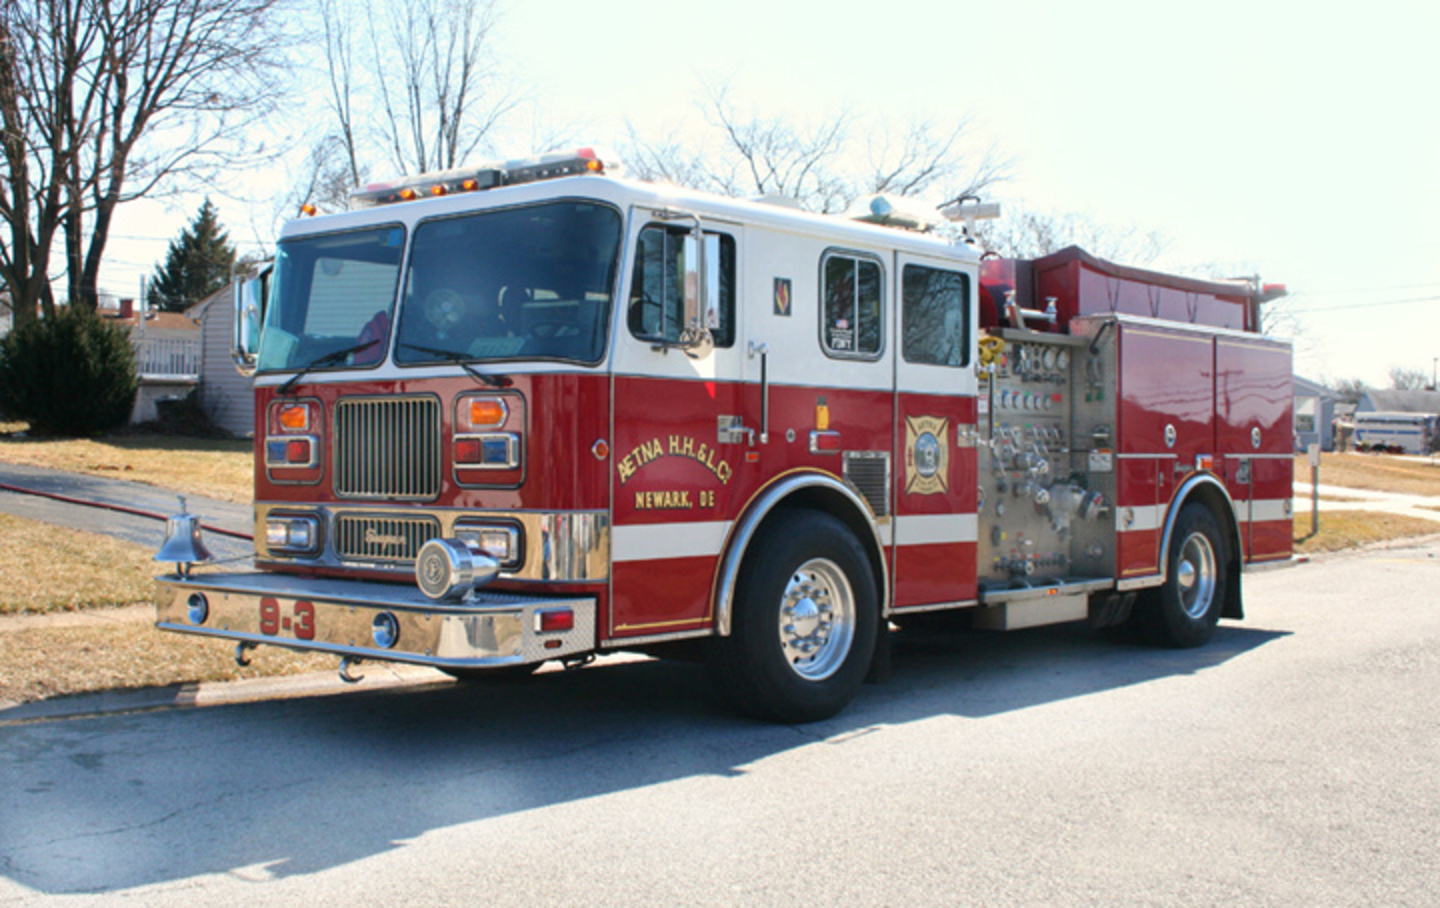 Seagrave LadderPumper Photo Gallery: Photo #02 out of 4, Image.